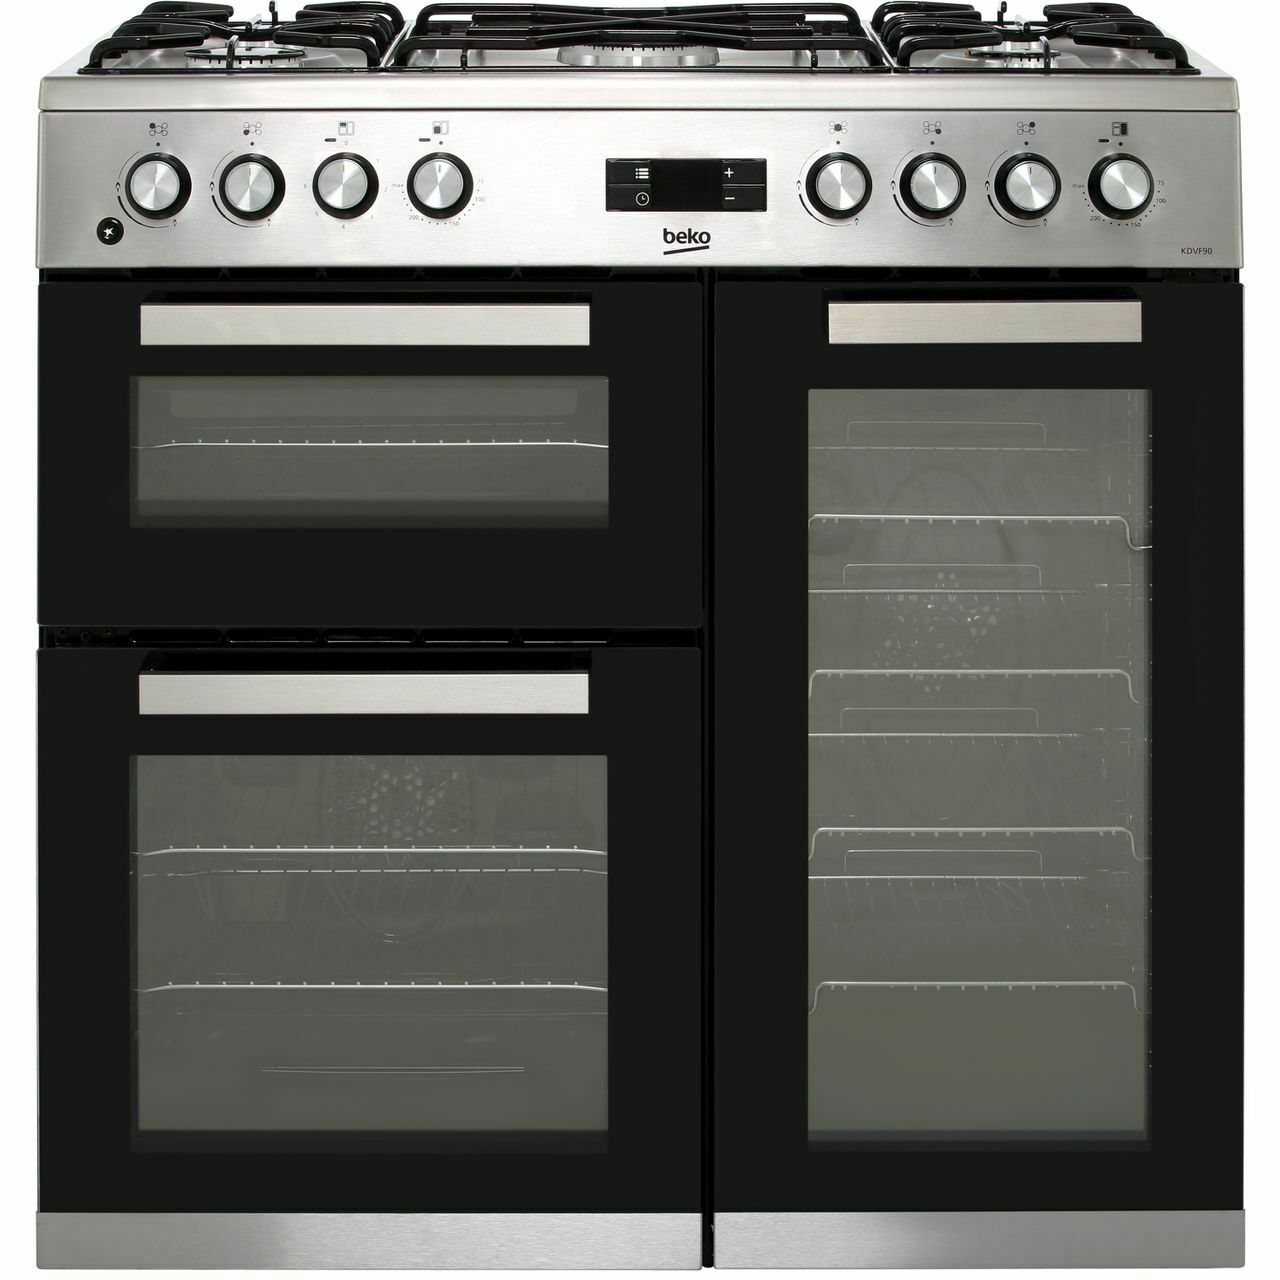 Beko KDVF90X 90cm 5 Burners A/A Dual Fuel Range Cooker Stainless Steel New 3922